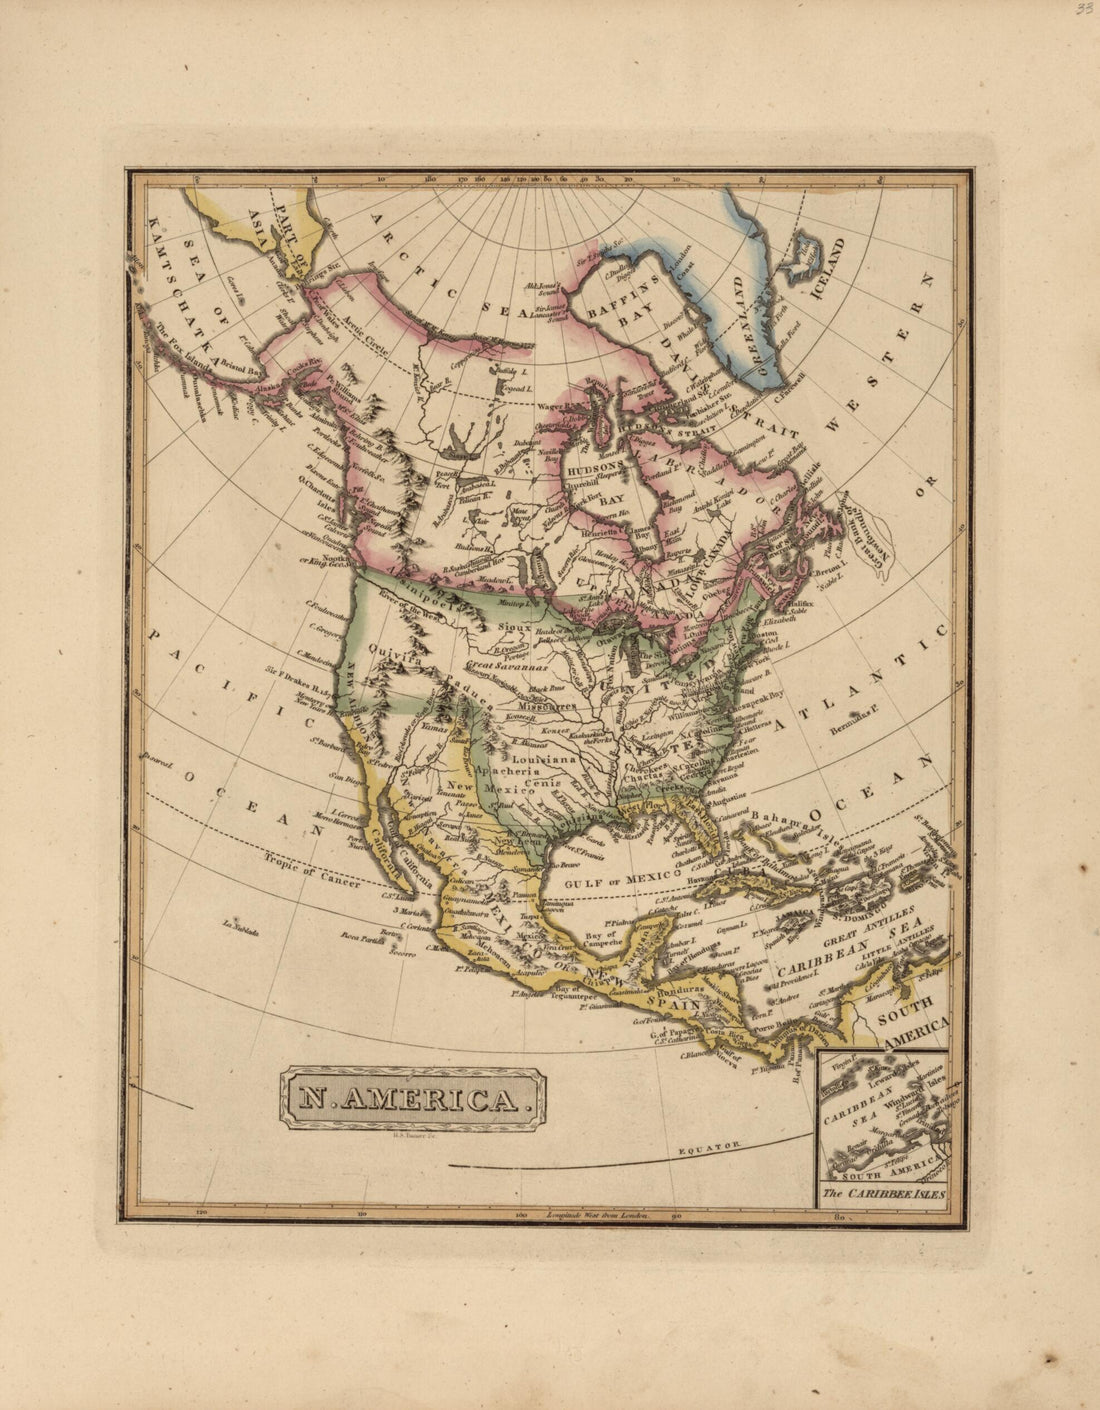 This old map of North America from a New and Elegant General Atlas, Containing Maps of Each of the United States  from 1817 was created by Henry Schenck Tanner in 1817